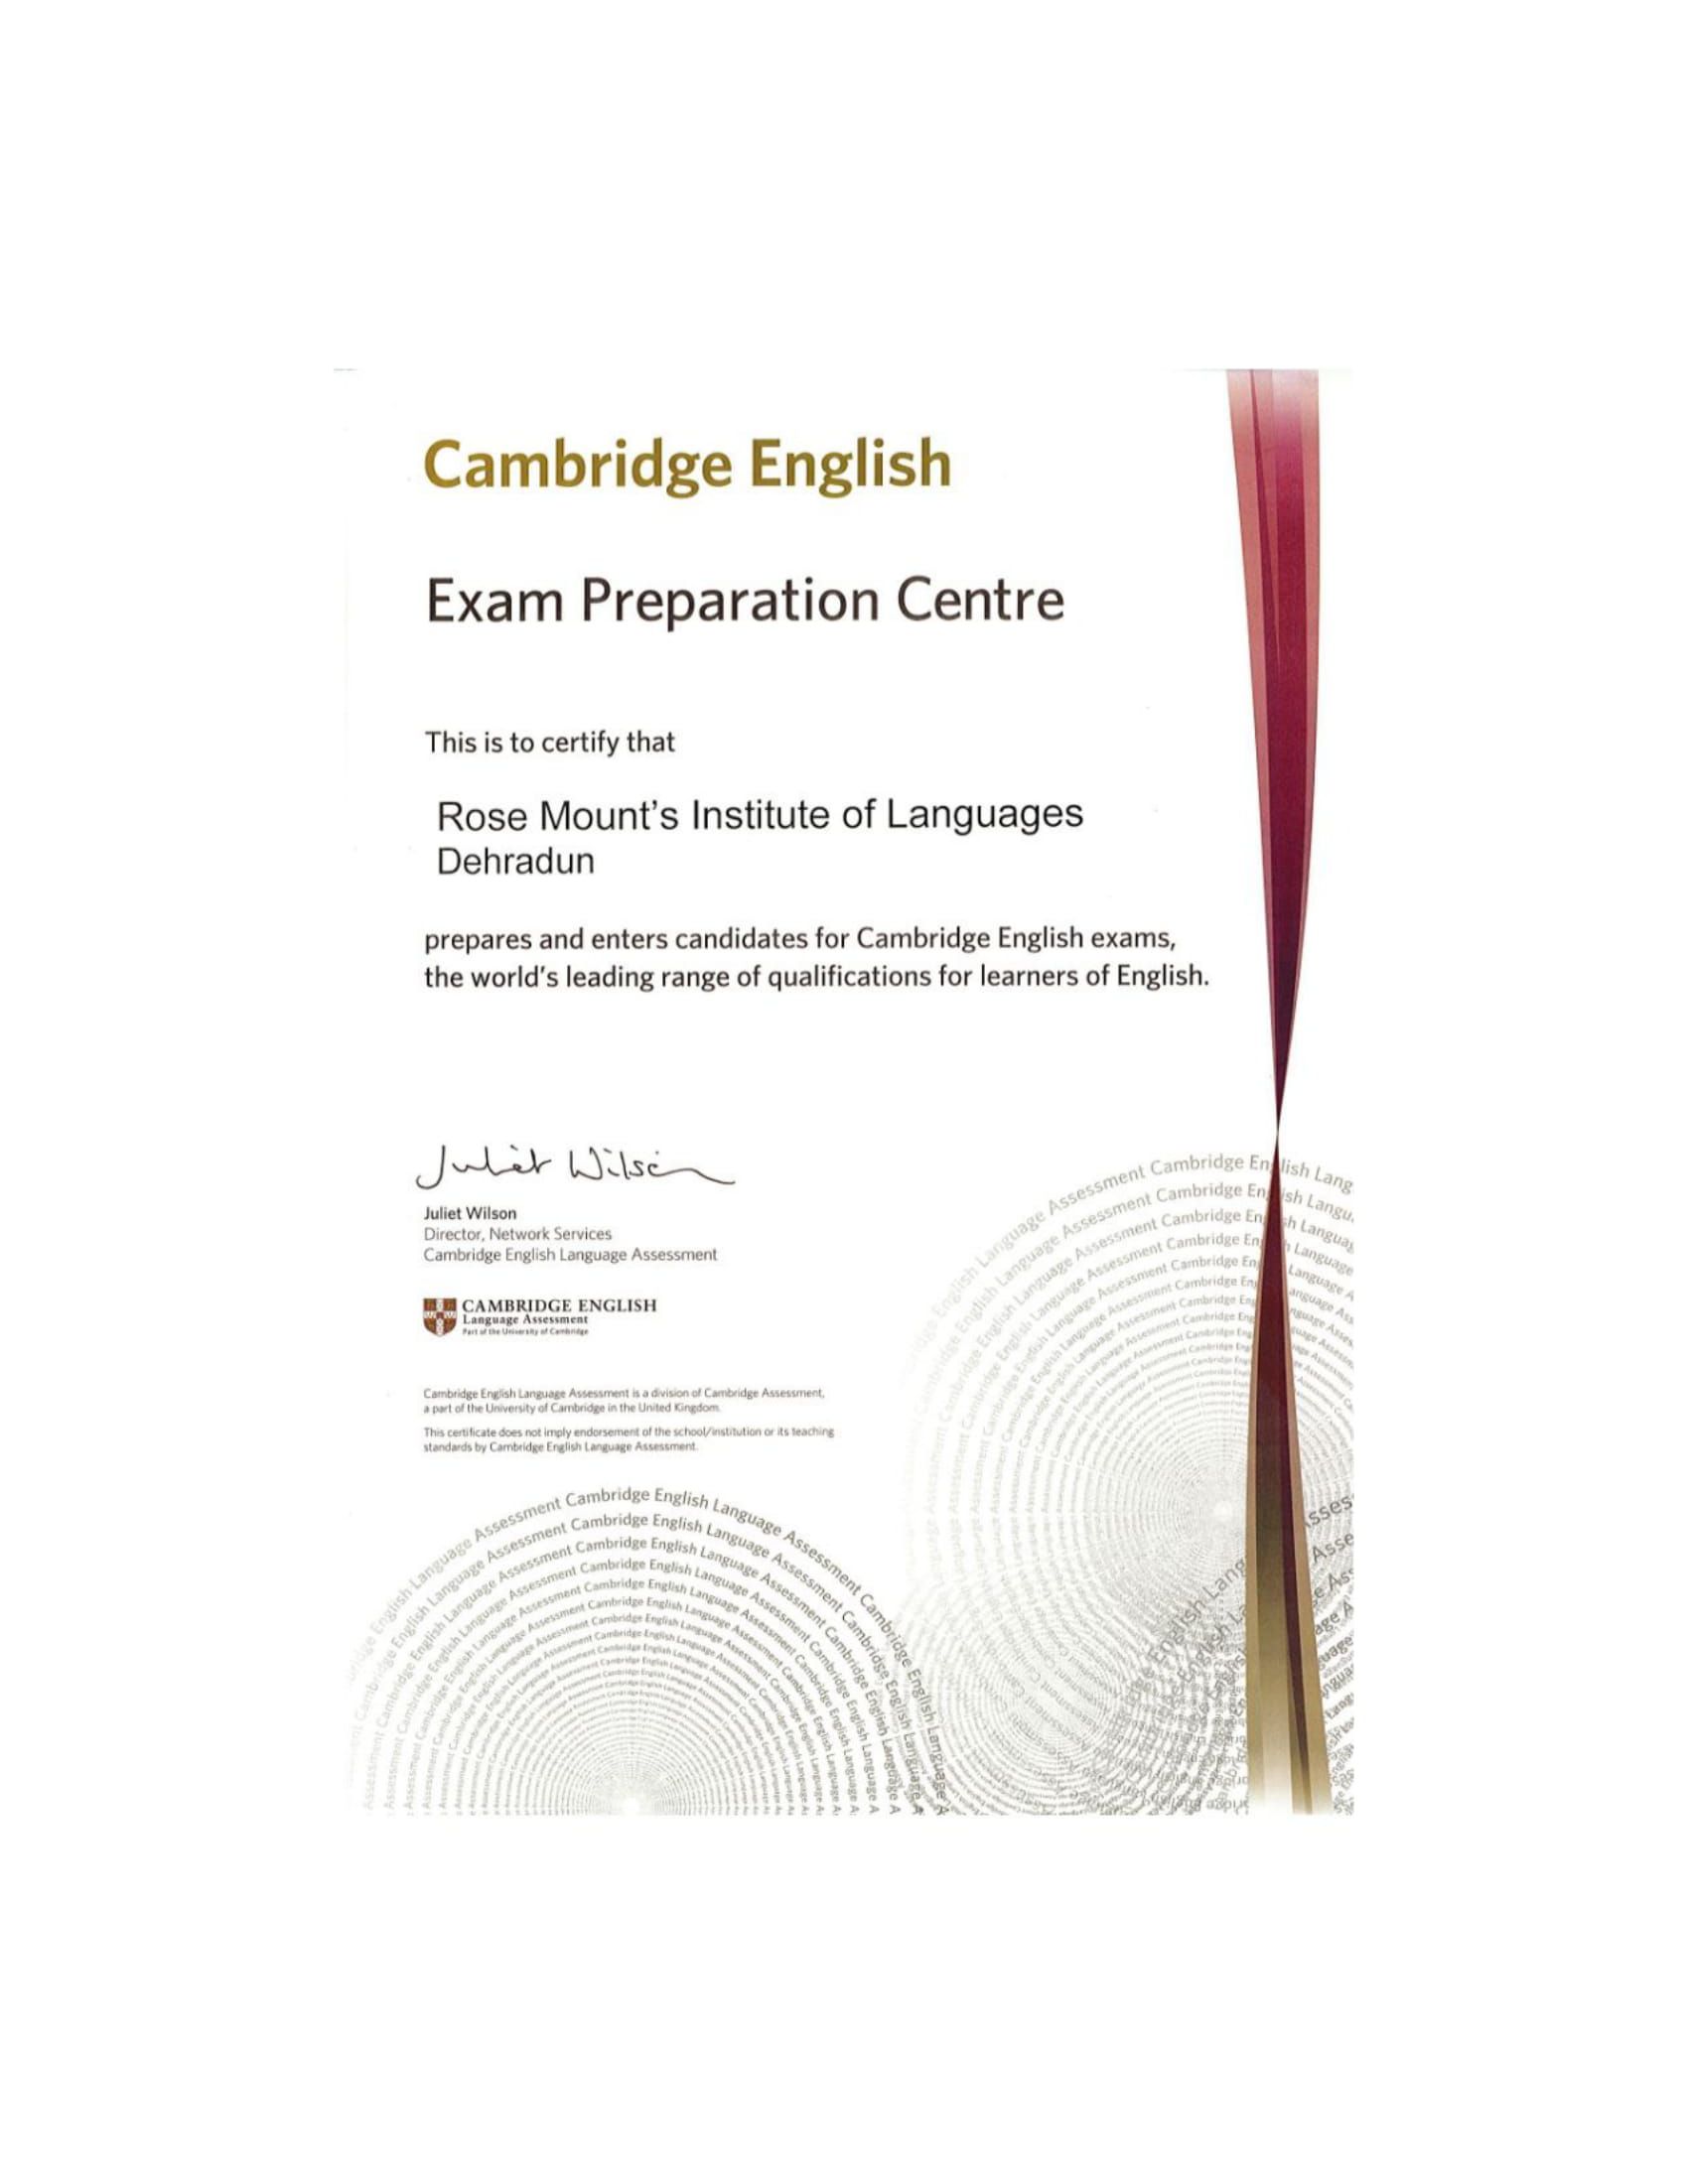 Certificate - Cambridge without date